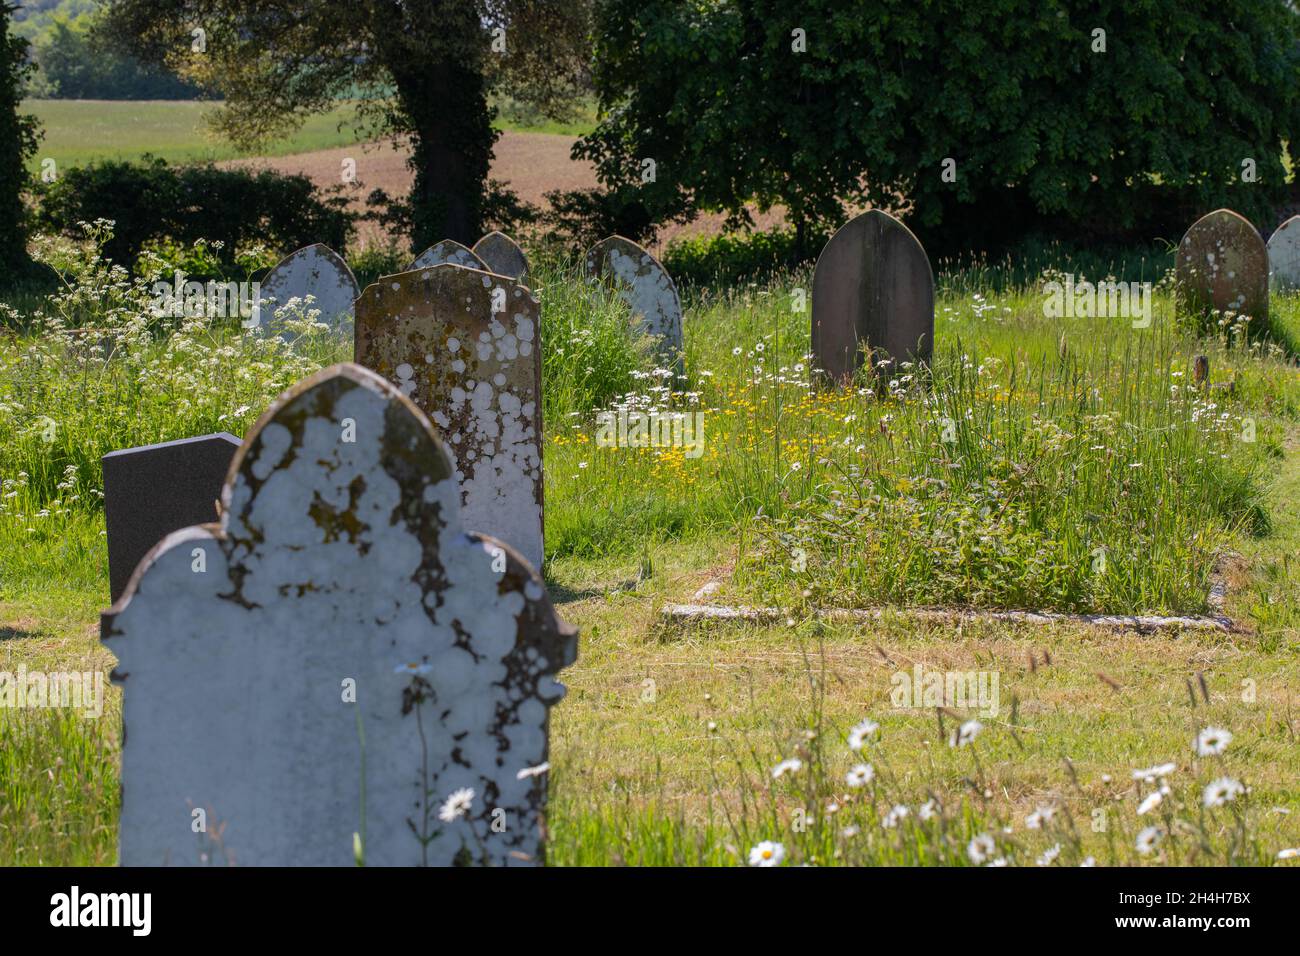 Comparison of intensive arable farming in background, with the biodiversity, plant life species growing within confines of church graveyard, in foregr Stock Photo